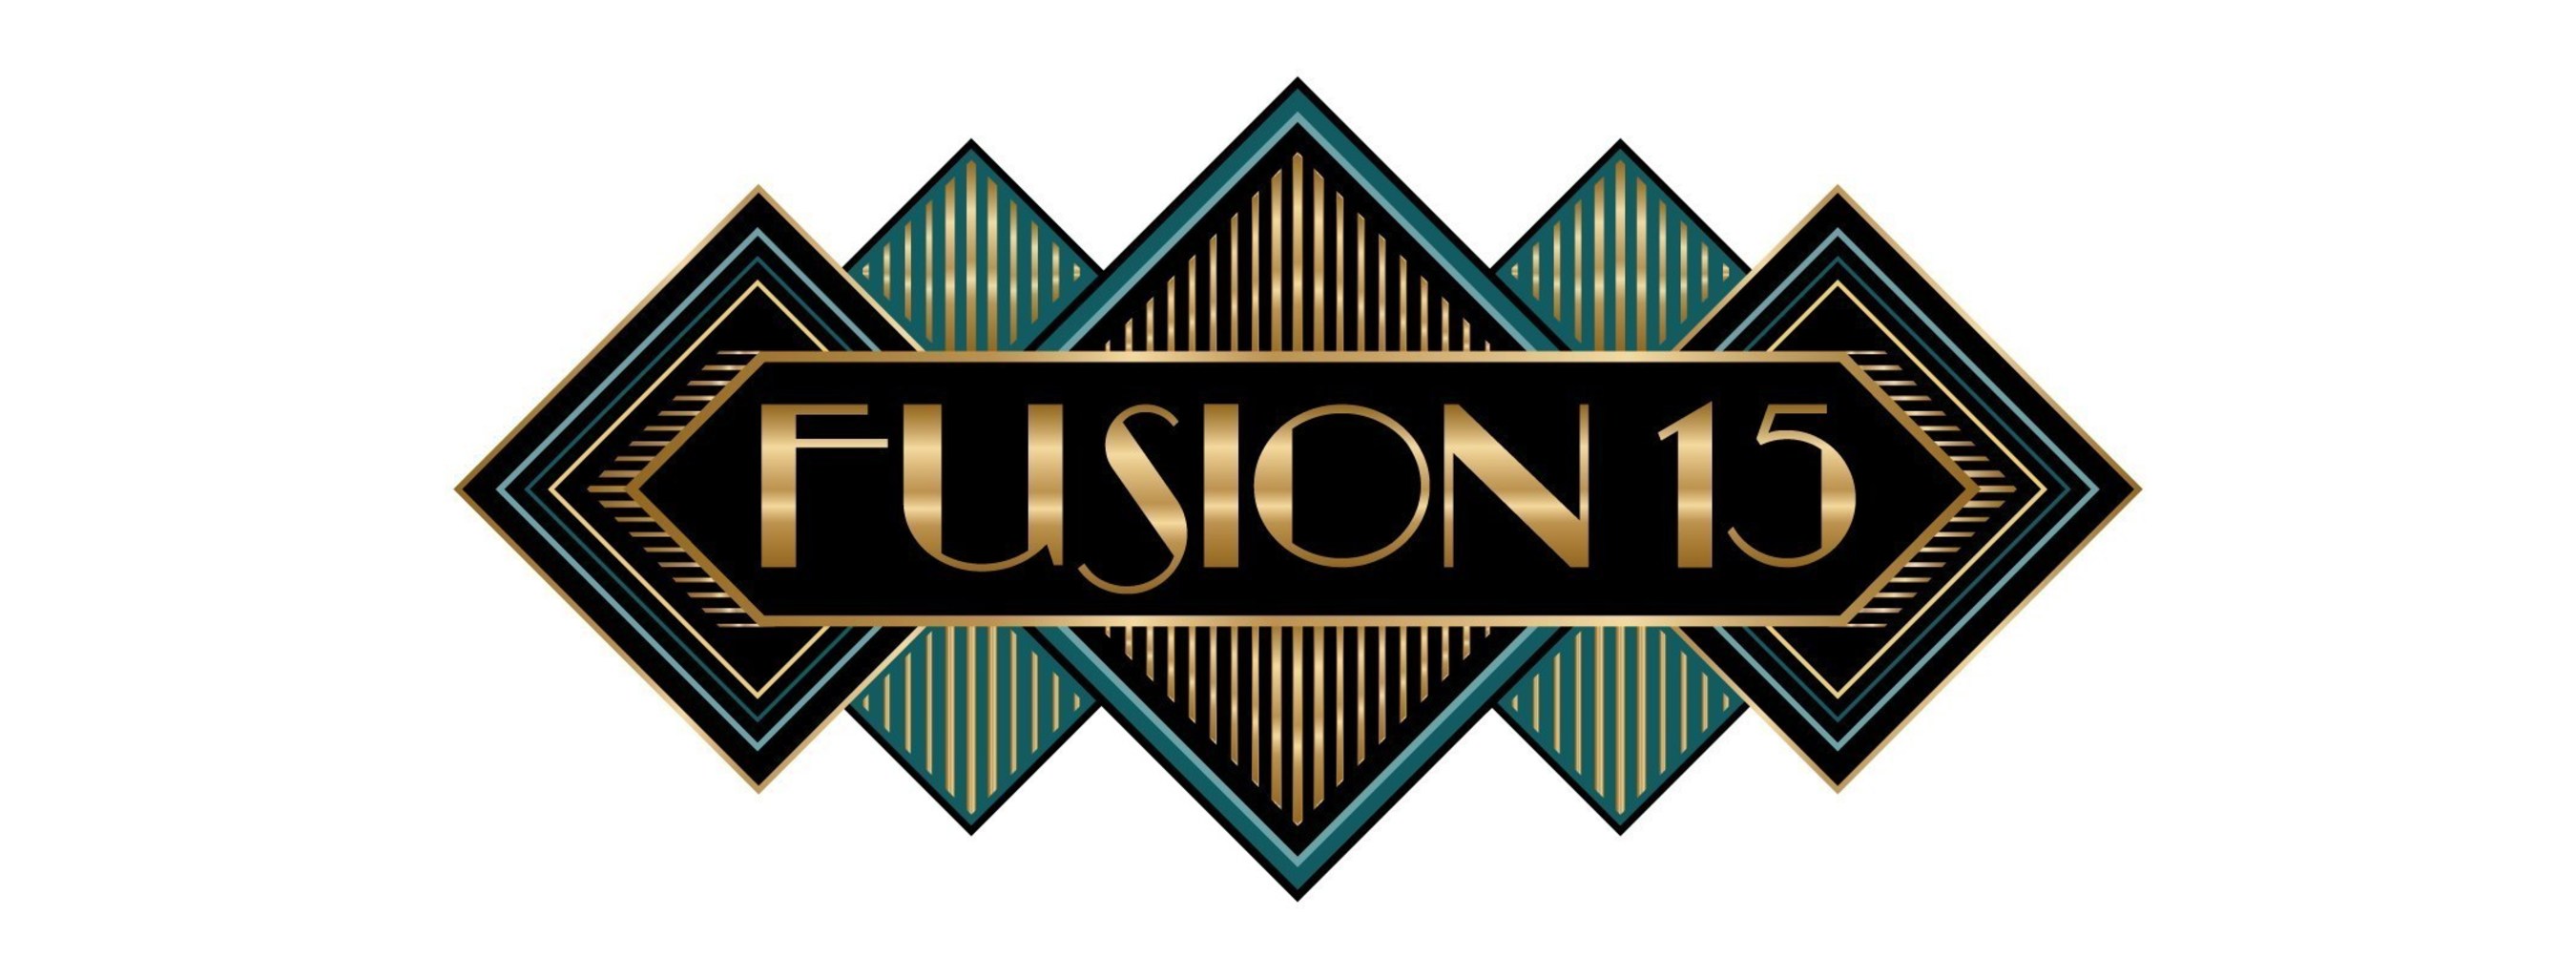 FUSION 15 will take place November 1-4, at the Hyatt Regency in New Orleans.